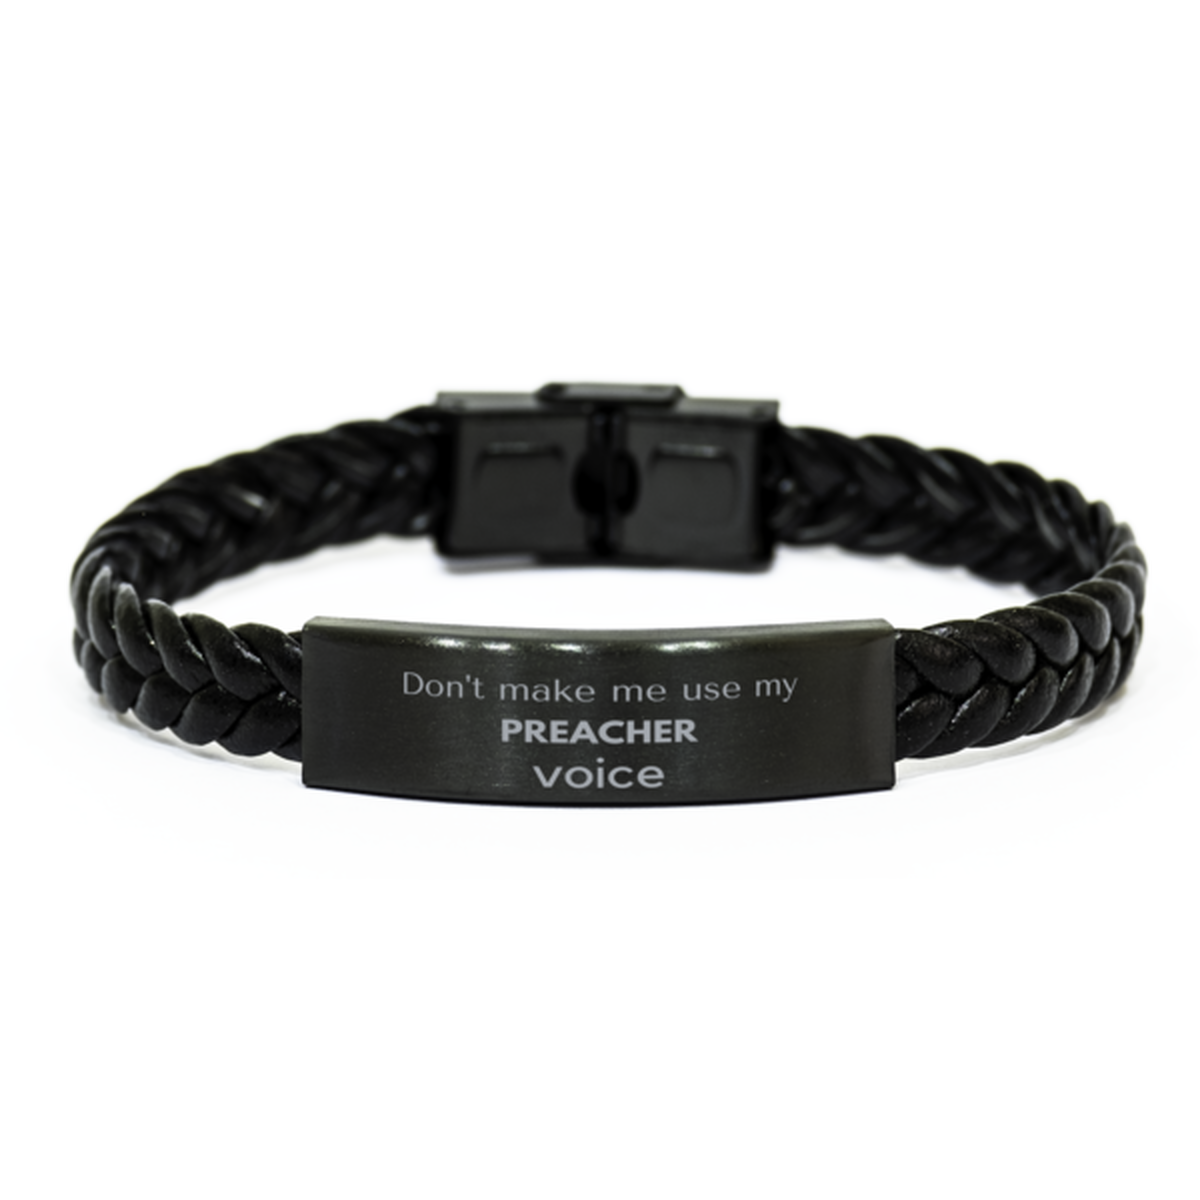 Don't make me use my Preacher voice, Sarcasm Preacher Gifts, Christmas Preacher Braided Leather Bracelet Birthday Unique Gifts For Preacher Coworkers, Men, Women, Colleague, Friends